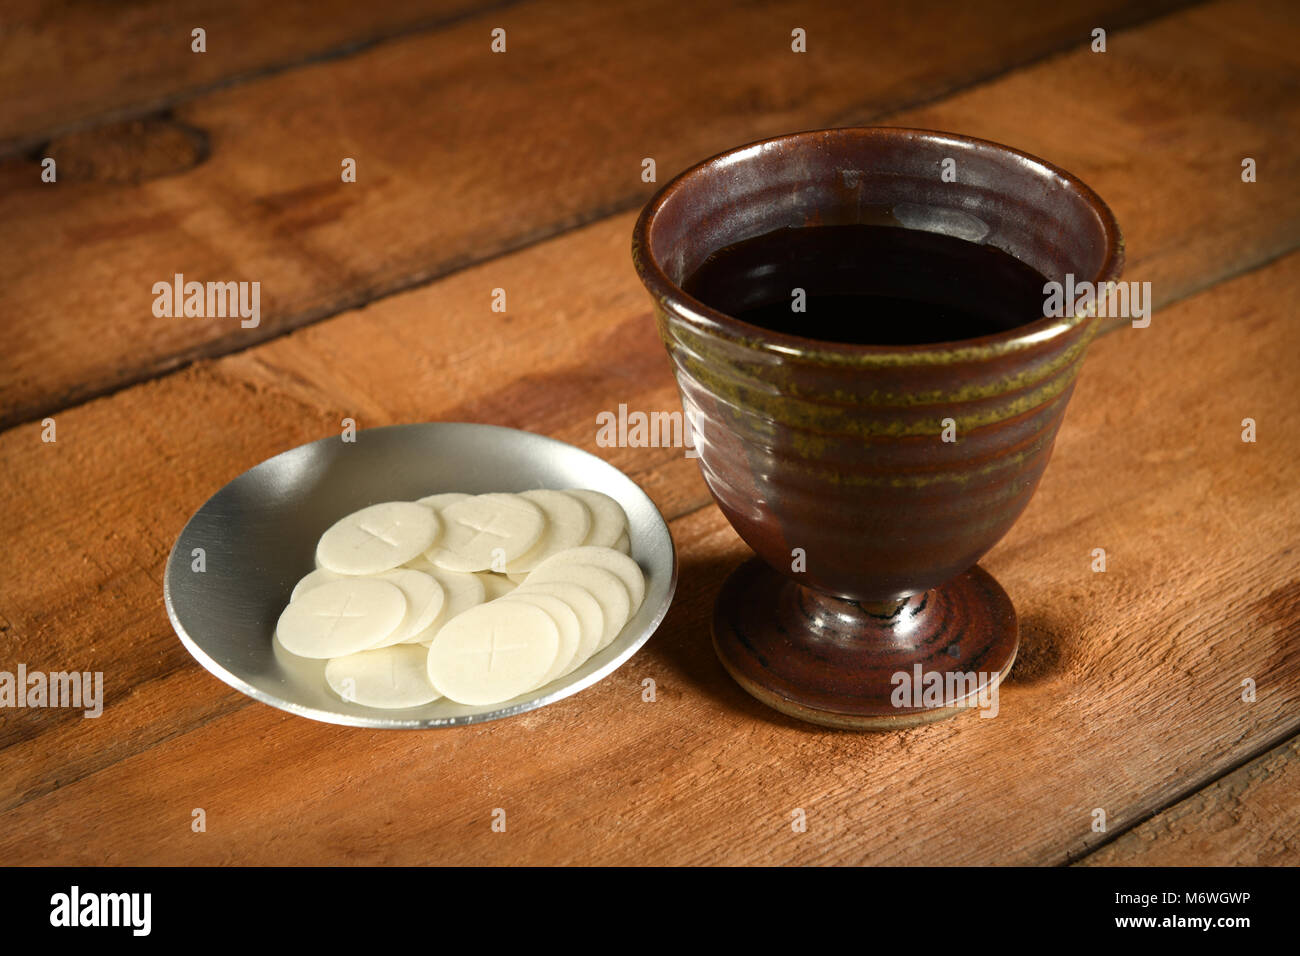 Communion wafers and cup of wine on wooden table Stock Photo